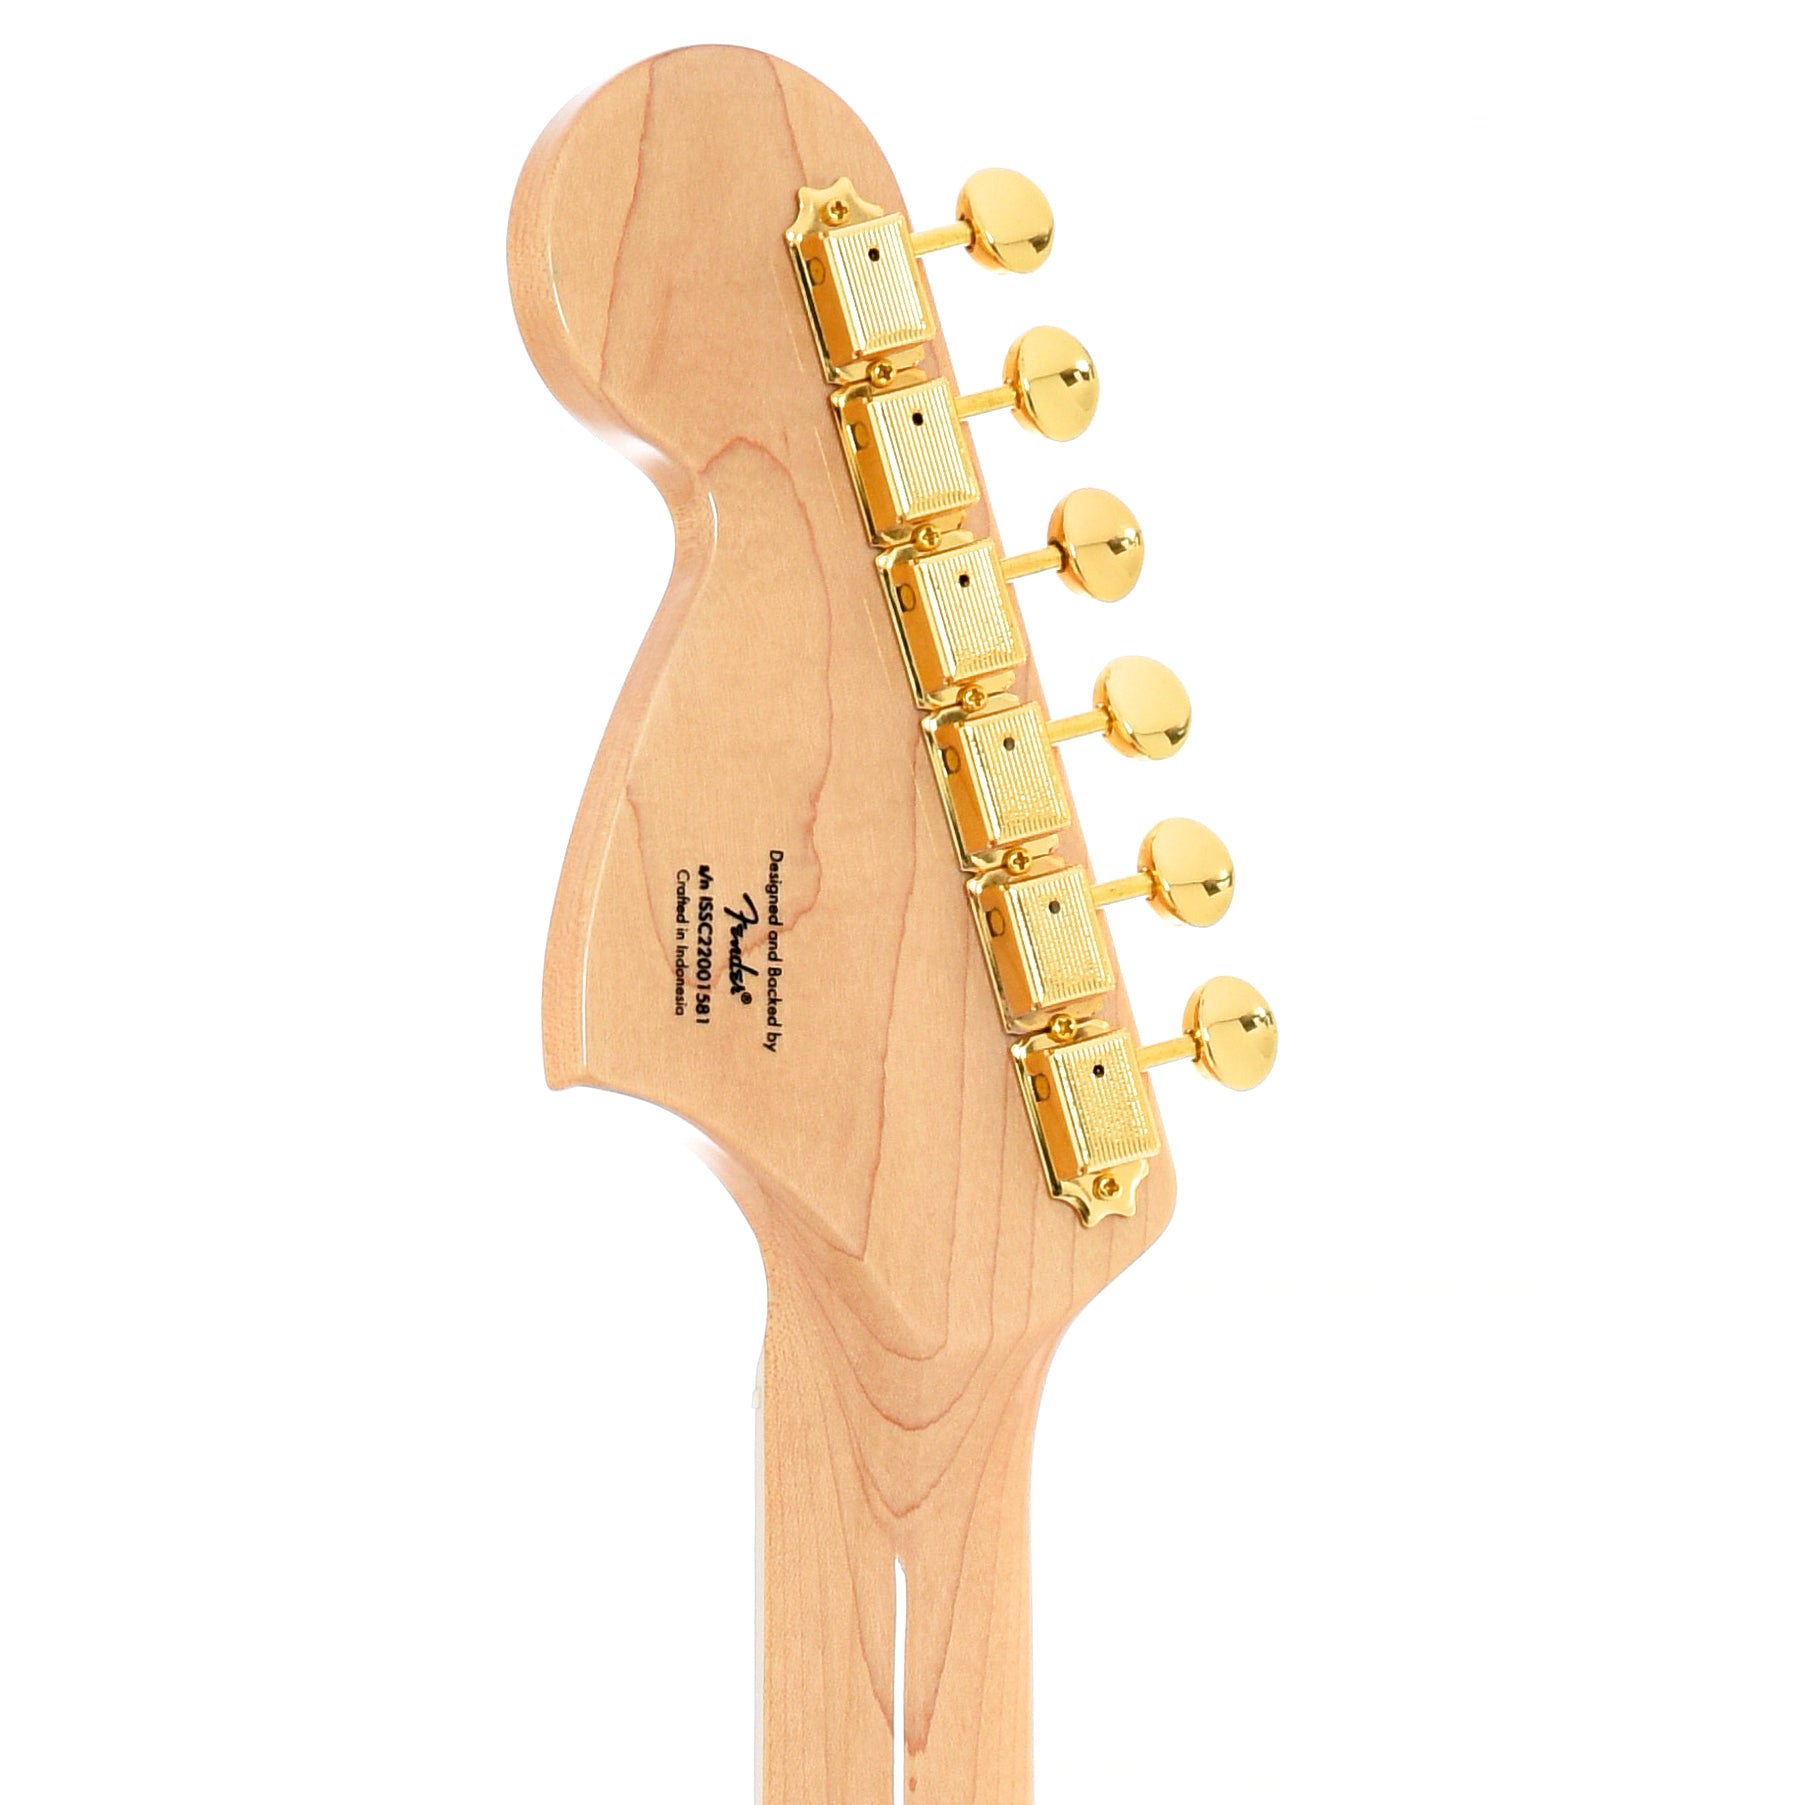 Back headstock of Squier 40th Anniversary Stratocaster, Gold Edition, Lake Placid Blue